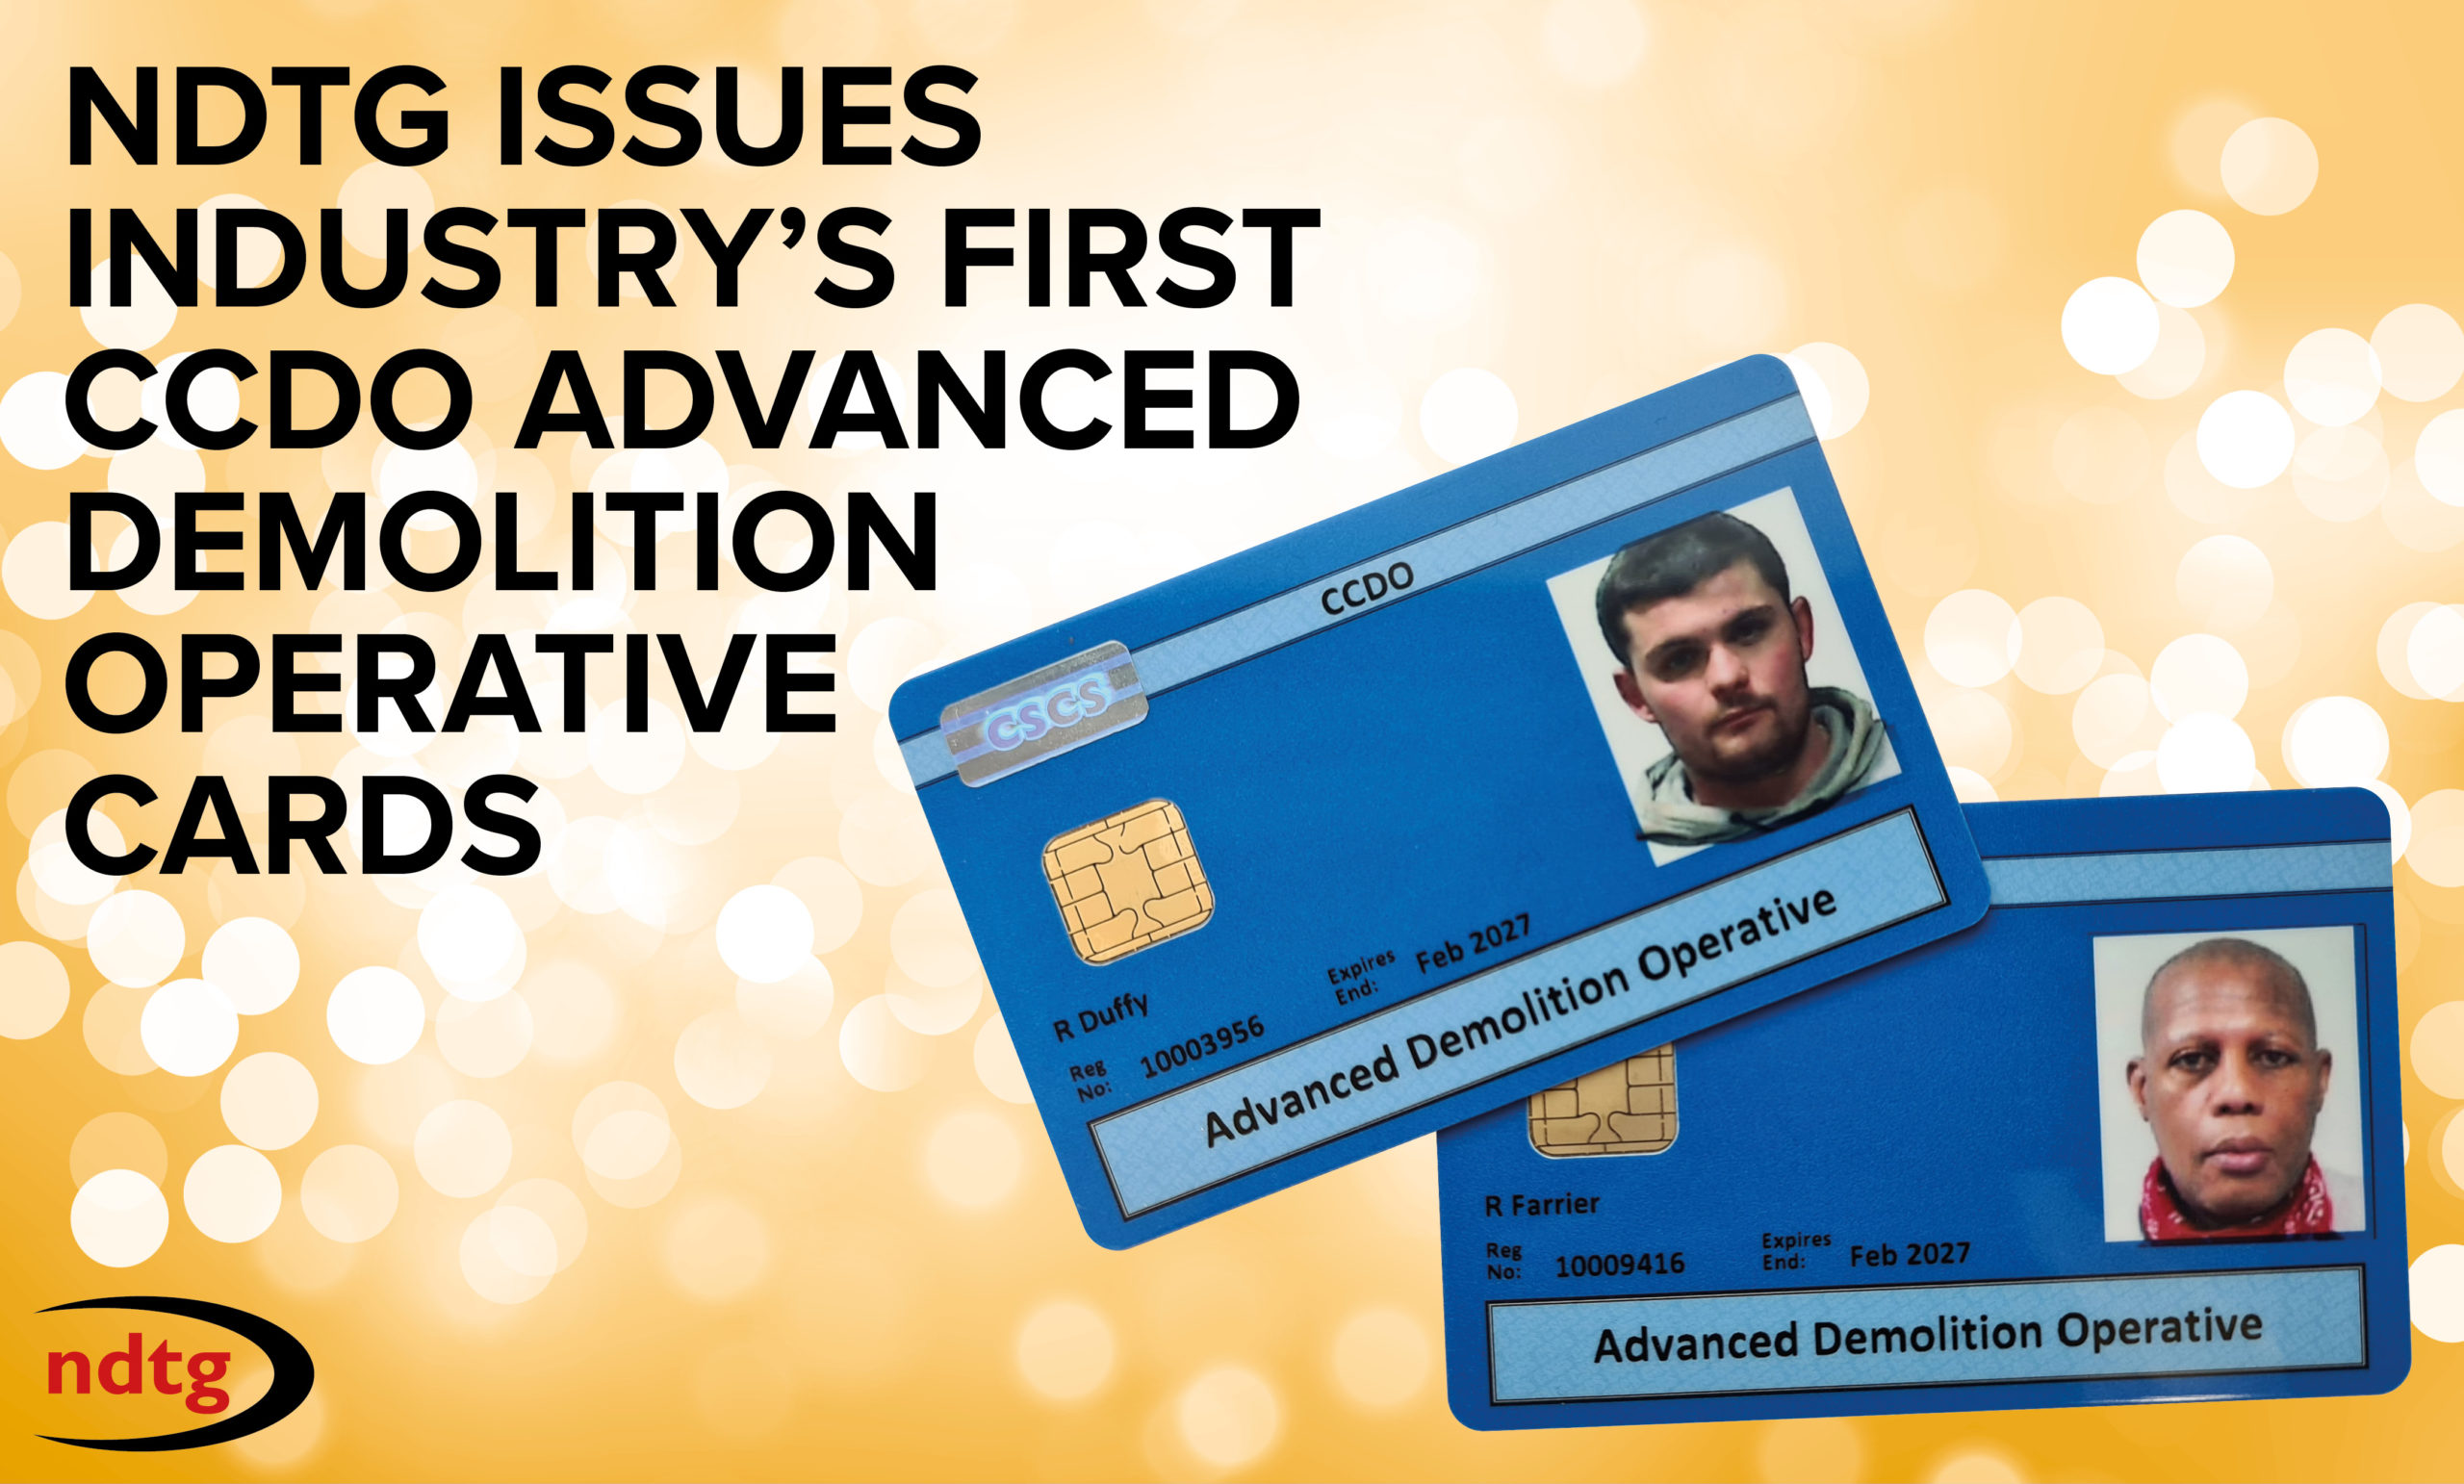 FIRST CCDO ADVANCED DEMOLITION OPERATIVE CARDS ISSUED